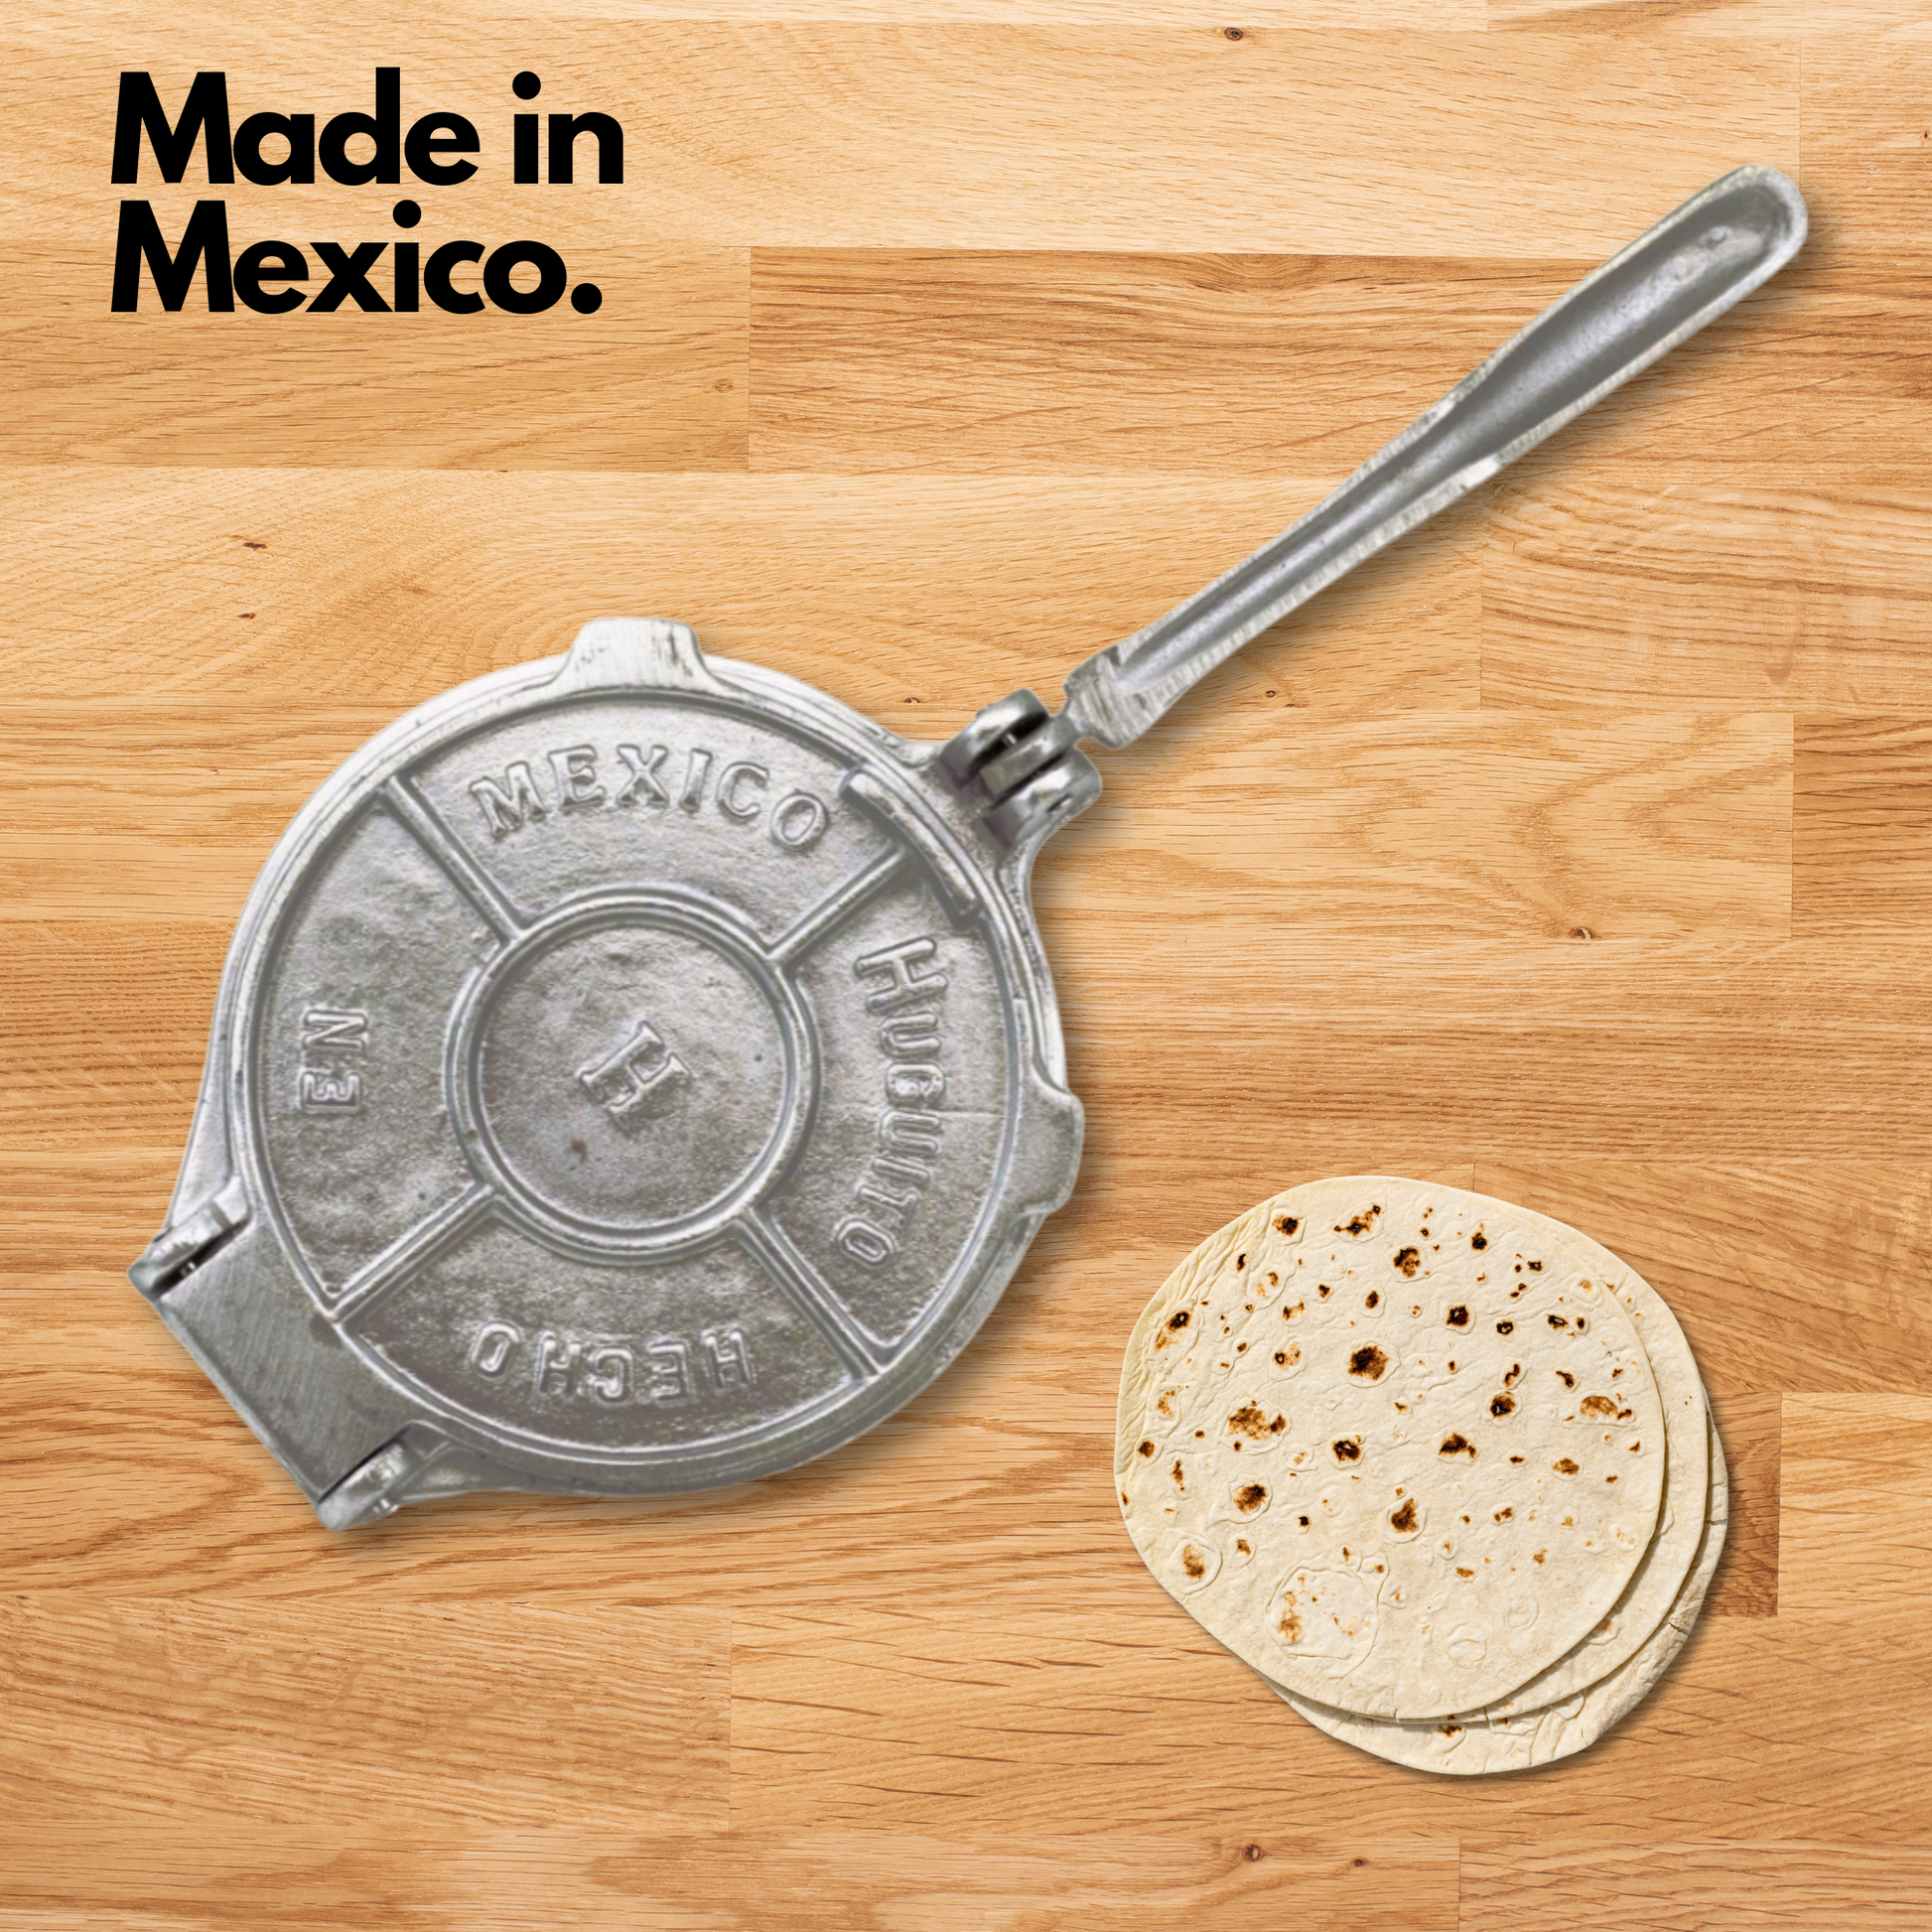 Authentic Mexican 7" Tortilla Press hand-casted in heavyweight aluminum for easy and even pressing.